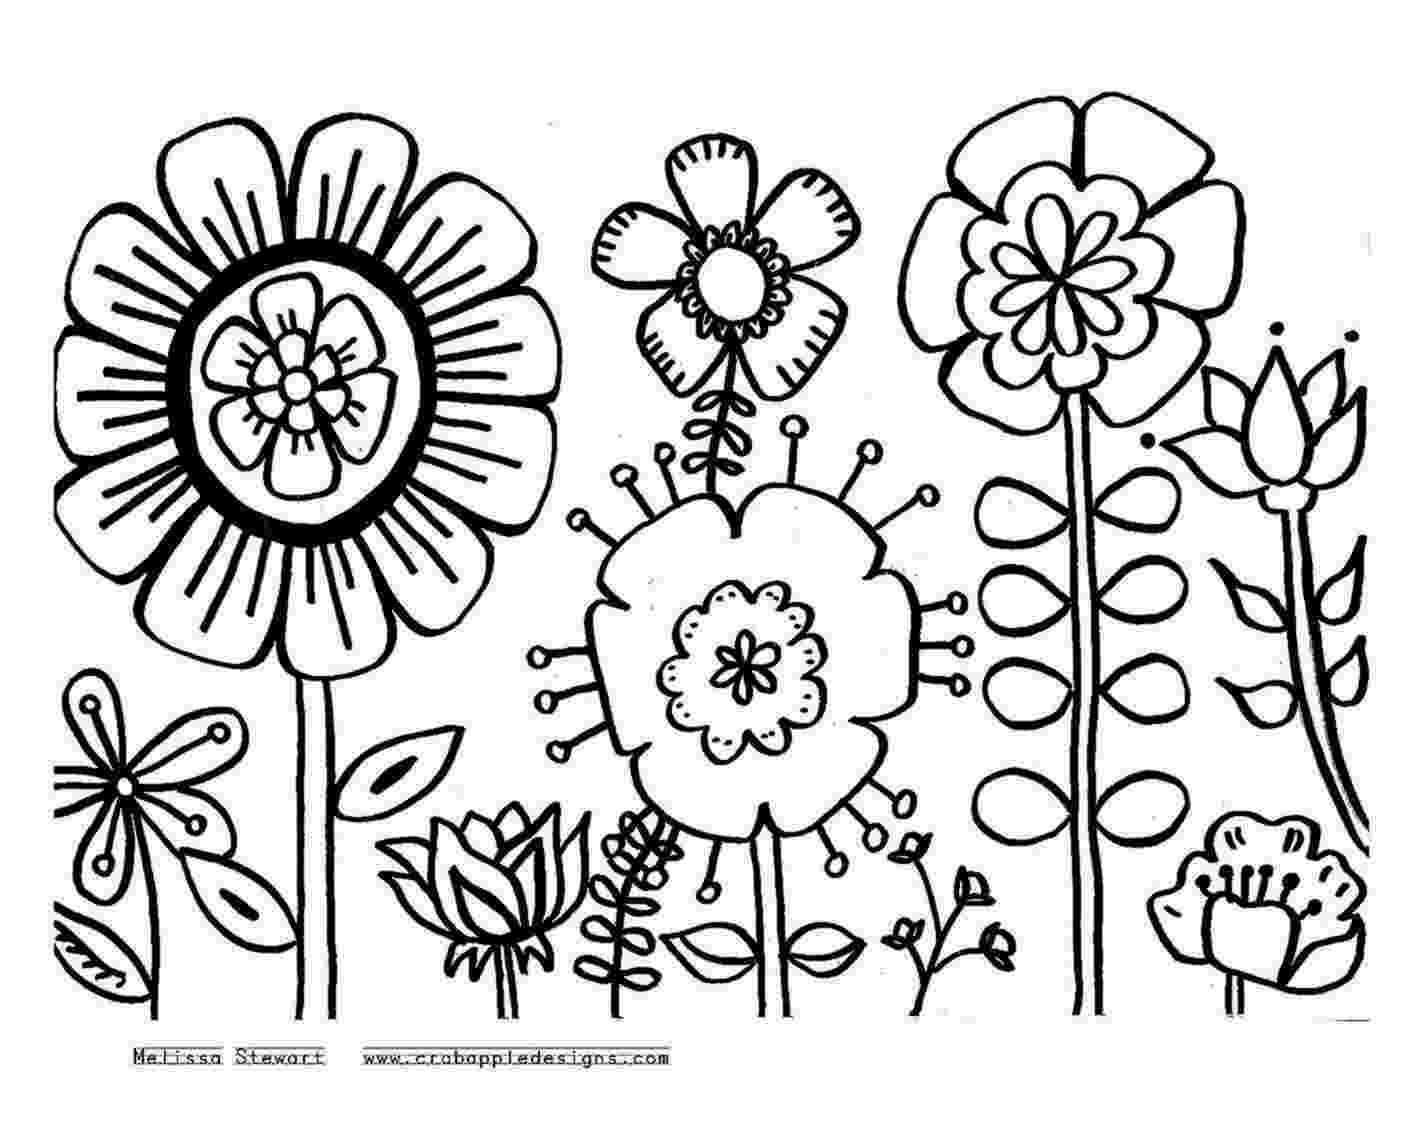 coloring pages of garden flowers 18 best images about gardening coloring pages on pinterest coloring garden of flowers pages 